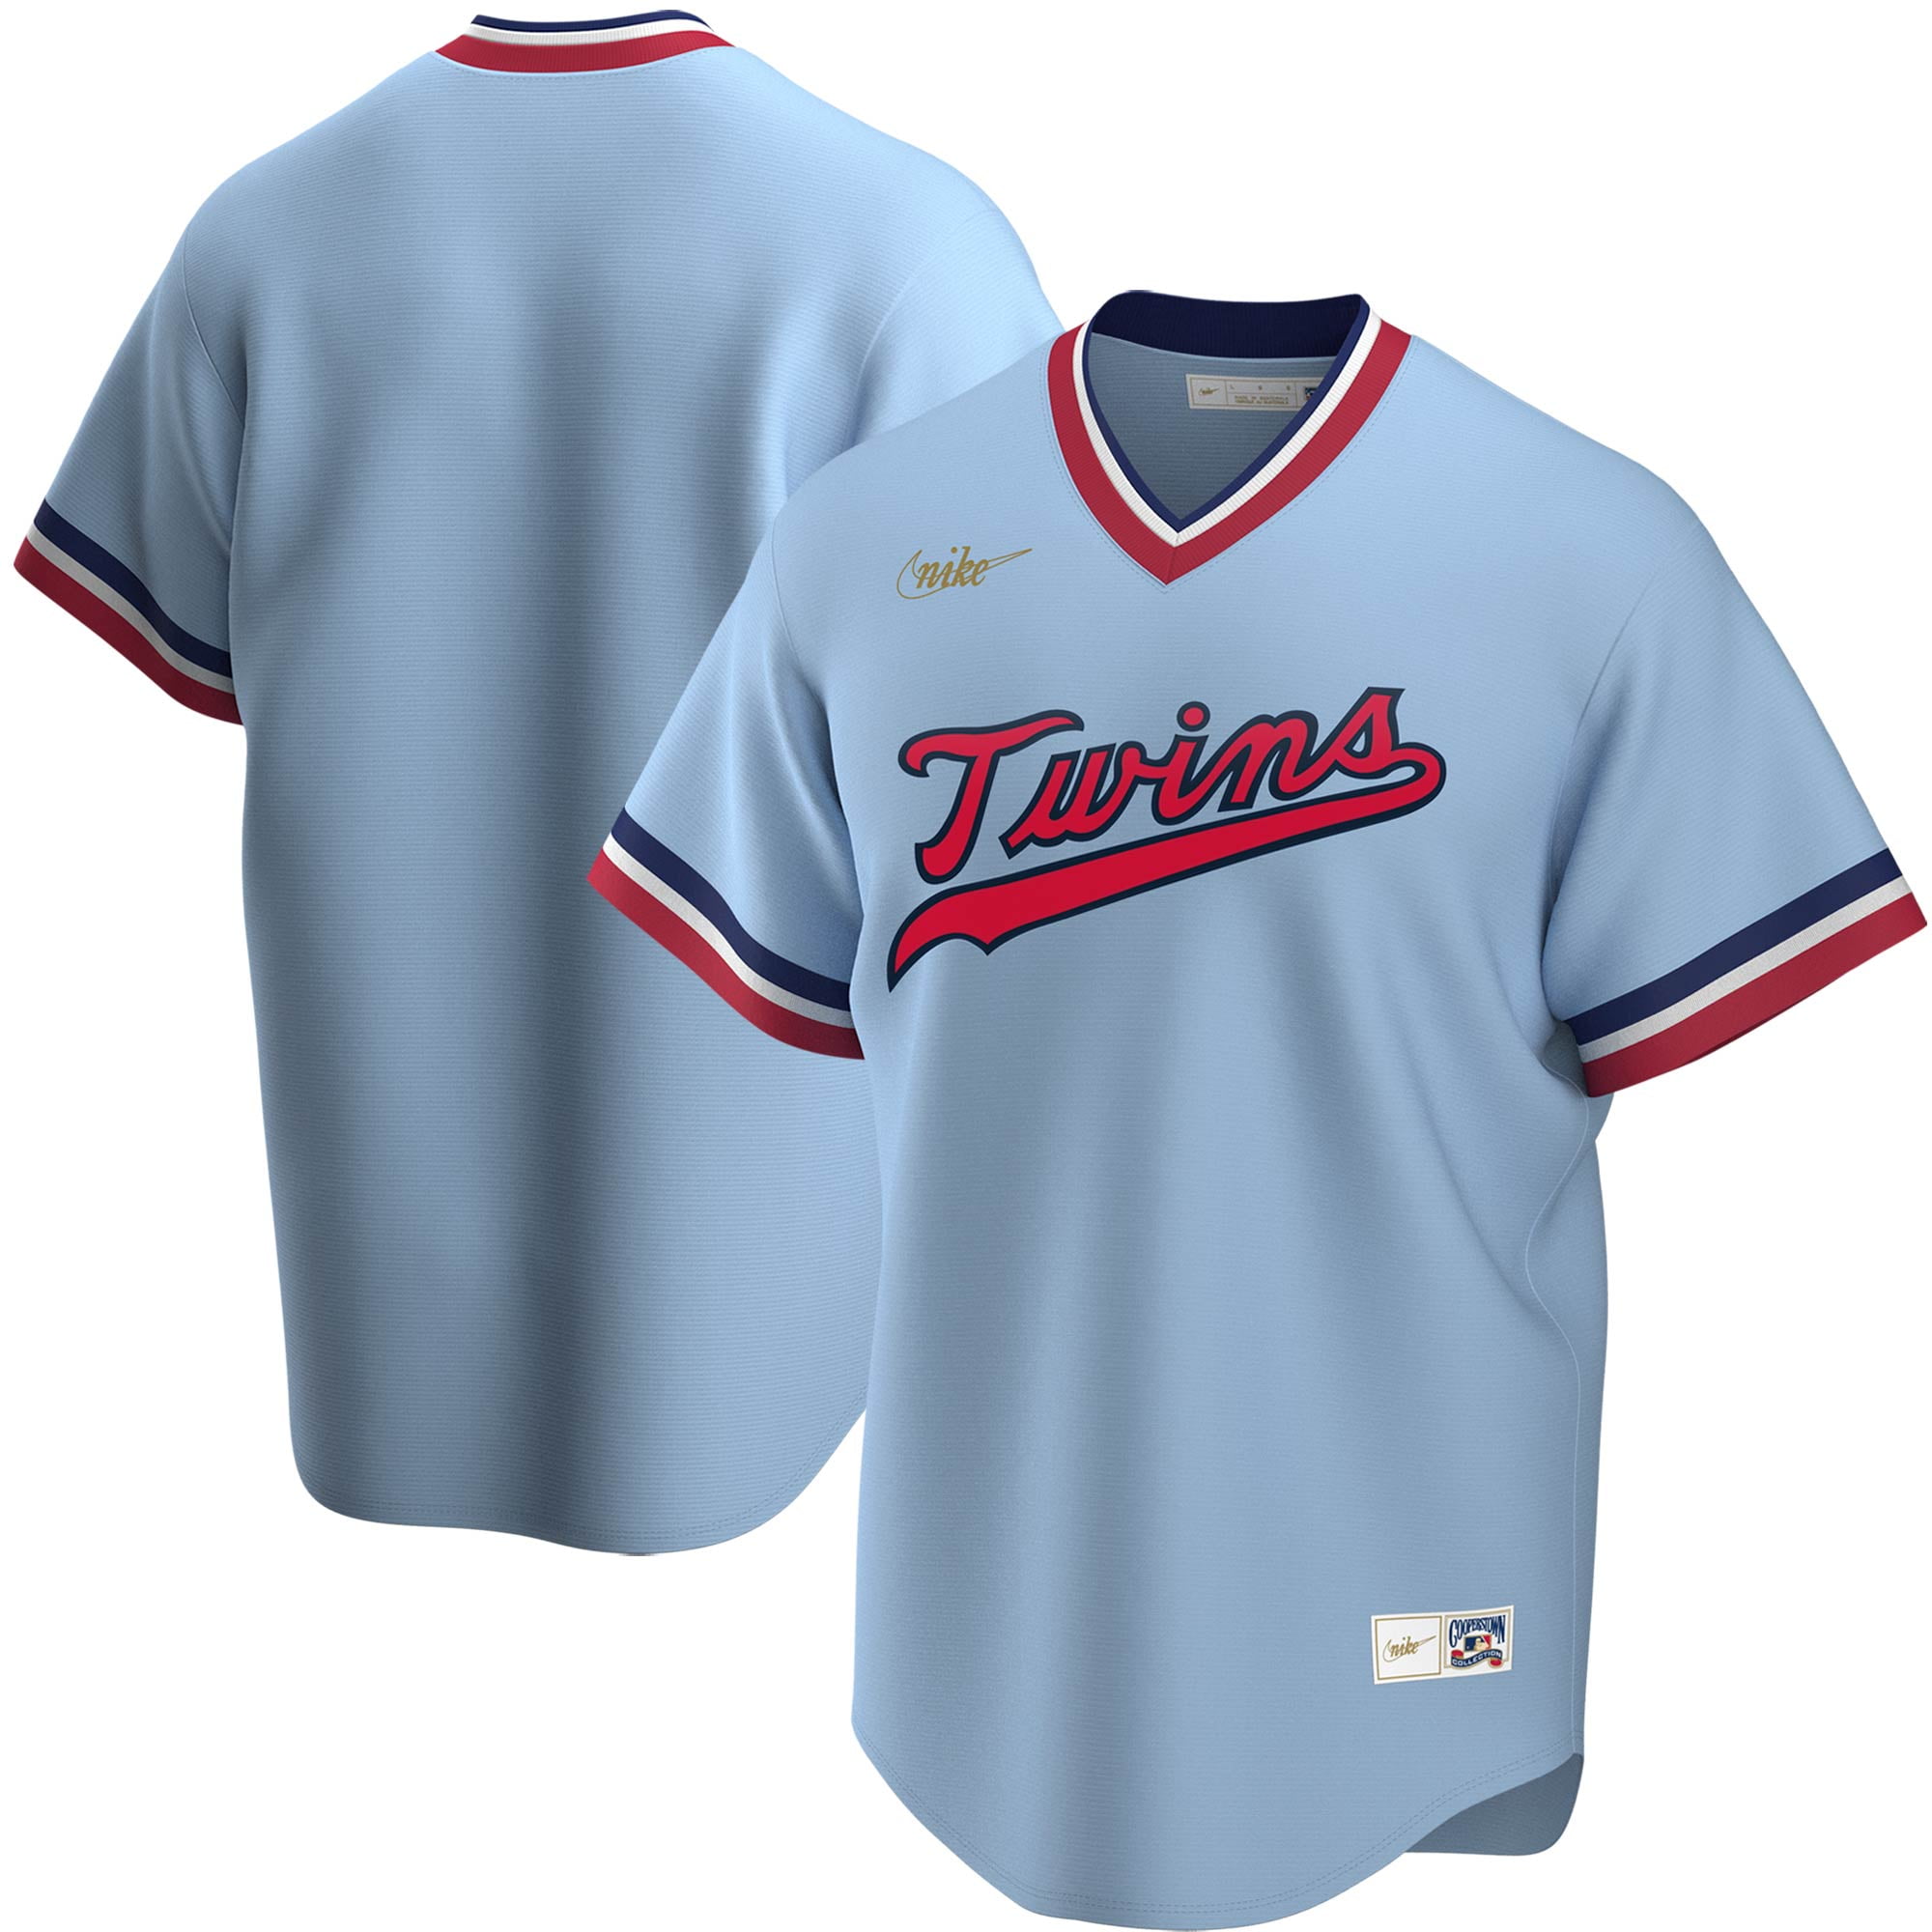 cooperstown classic jerseys